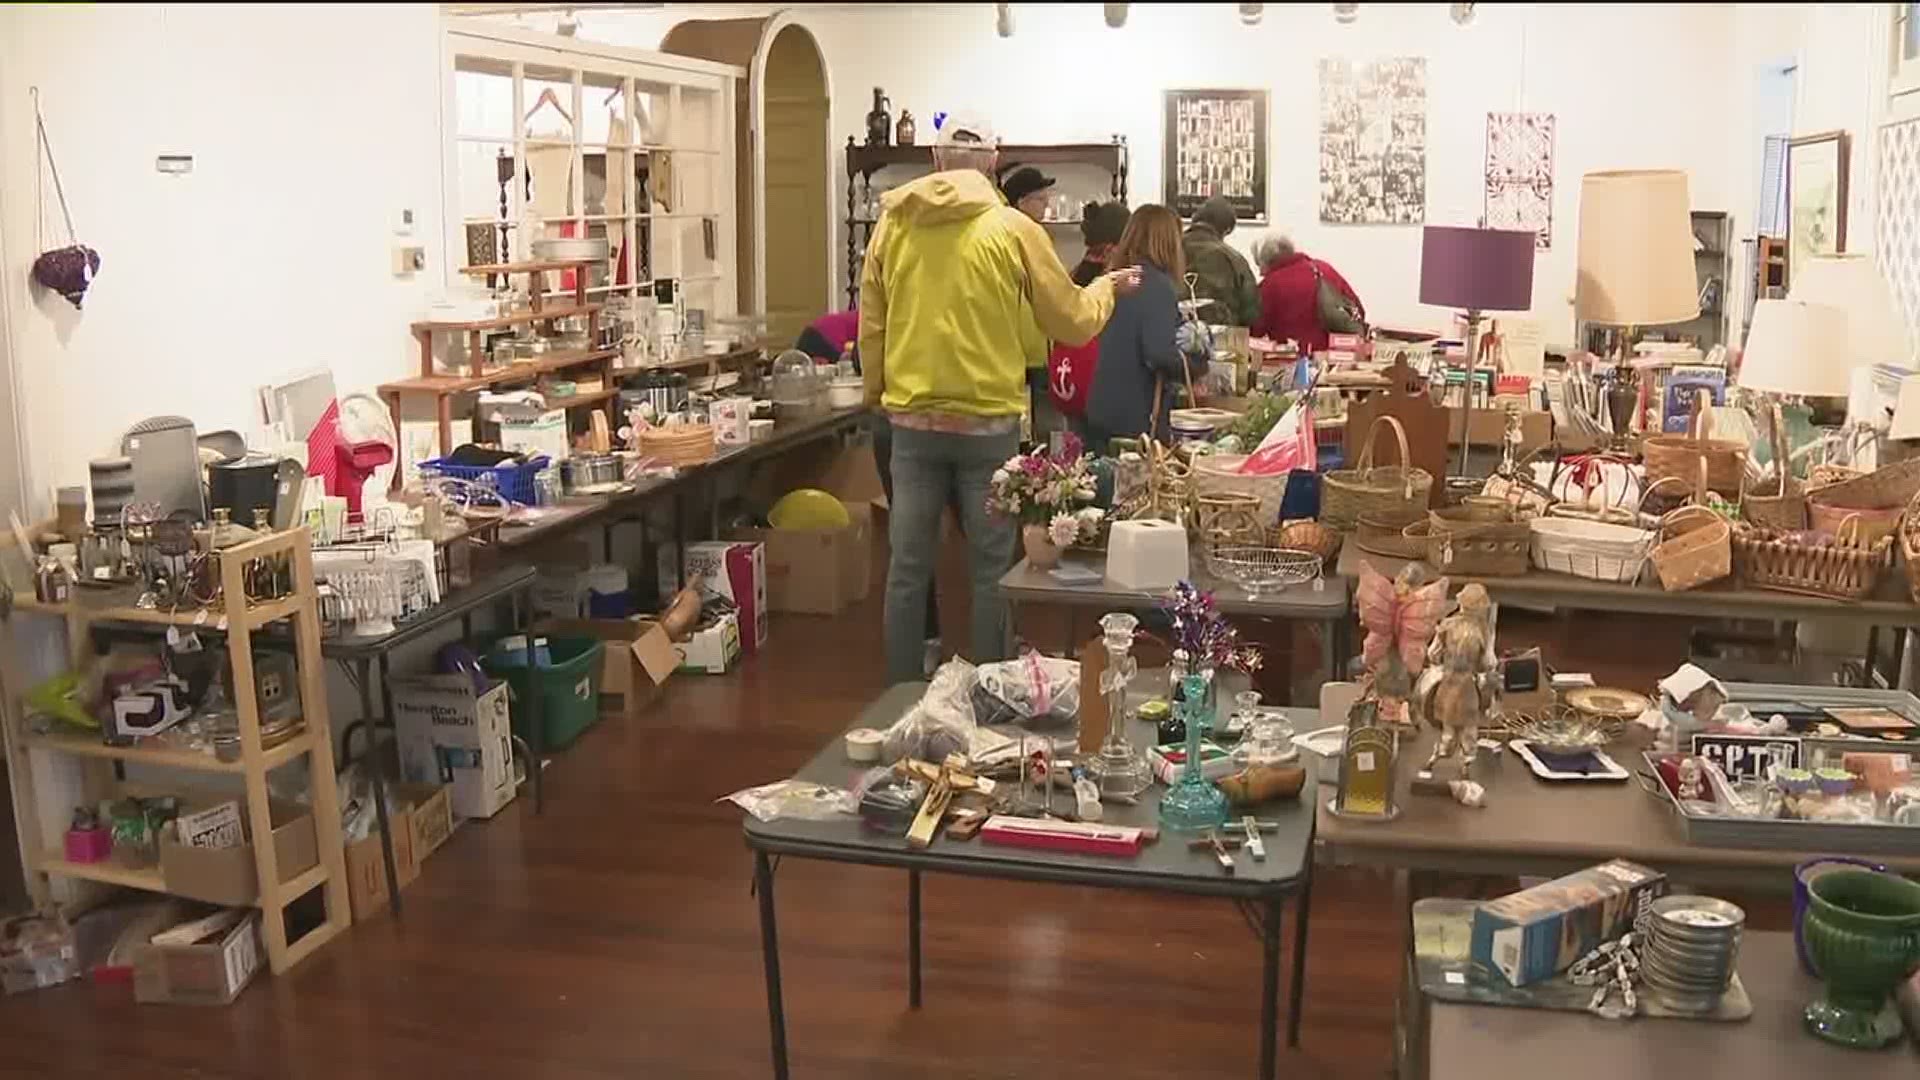 People packed the Packwood House in search of hidden treasures.